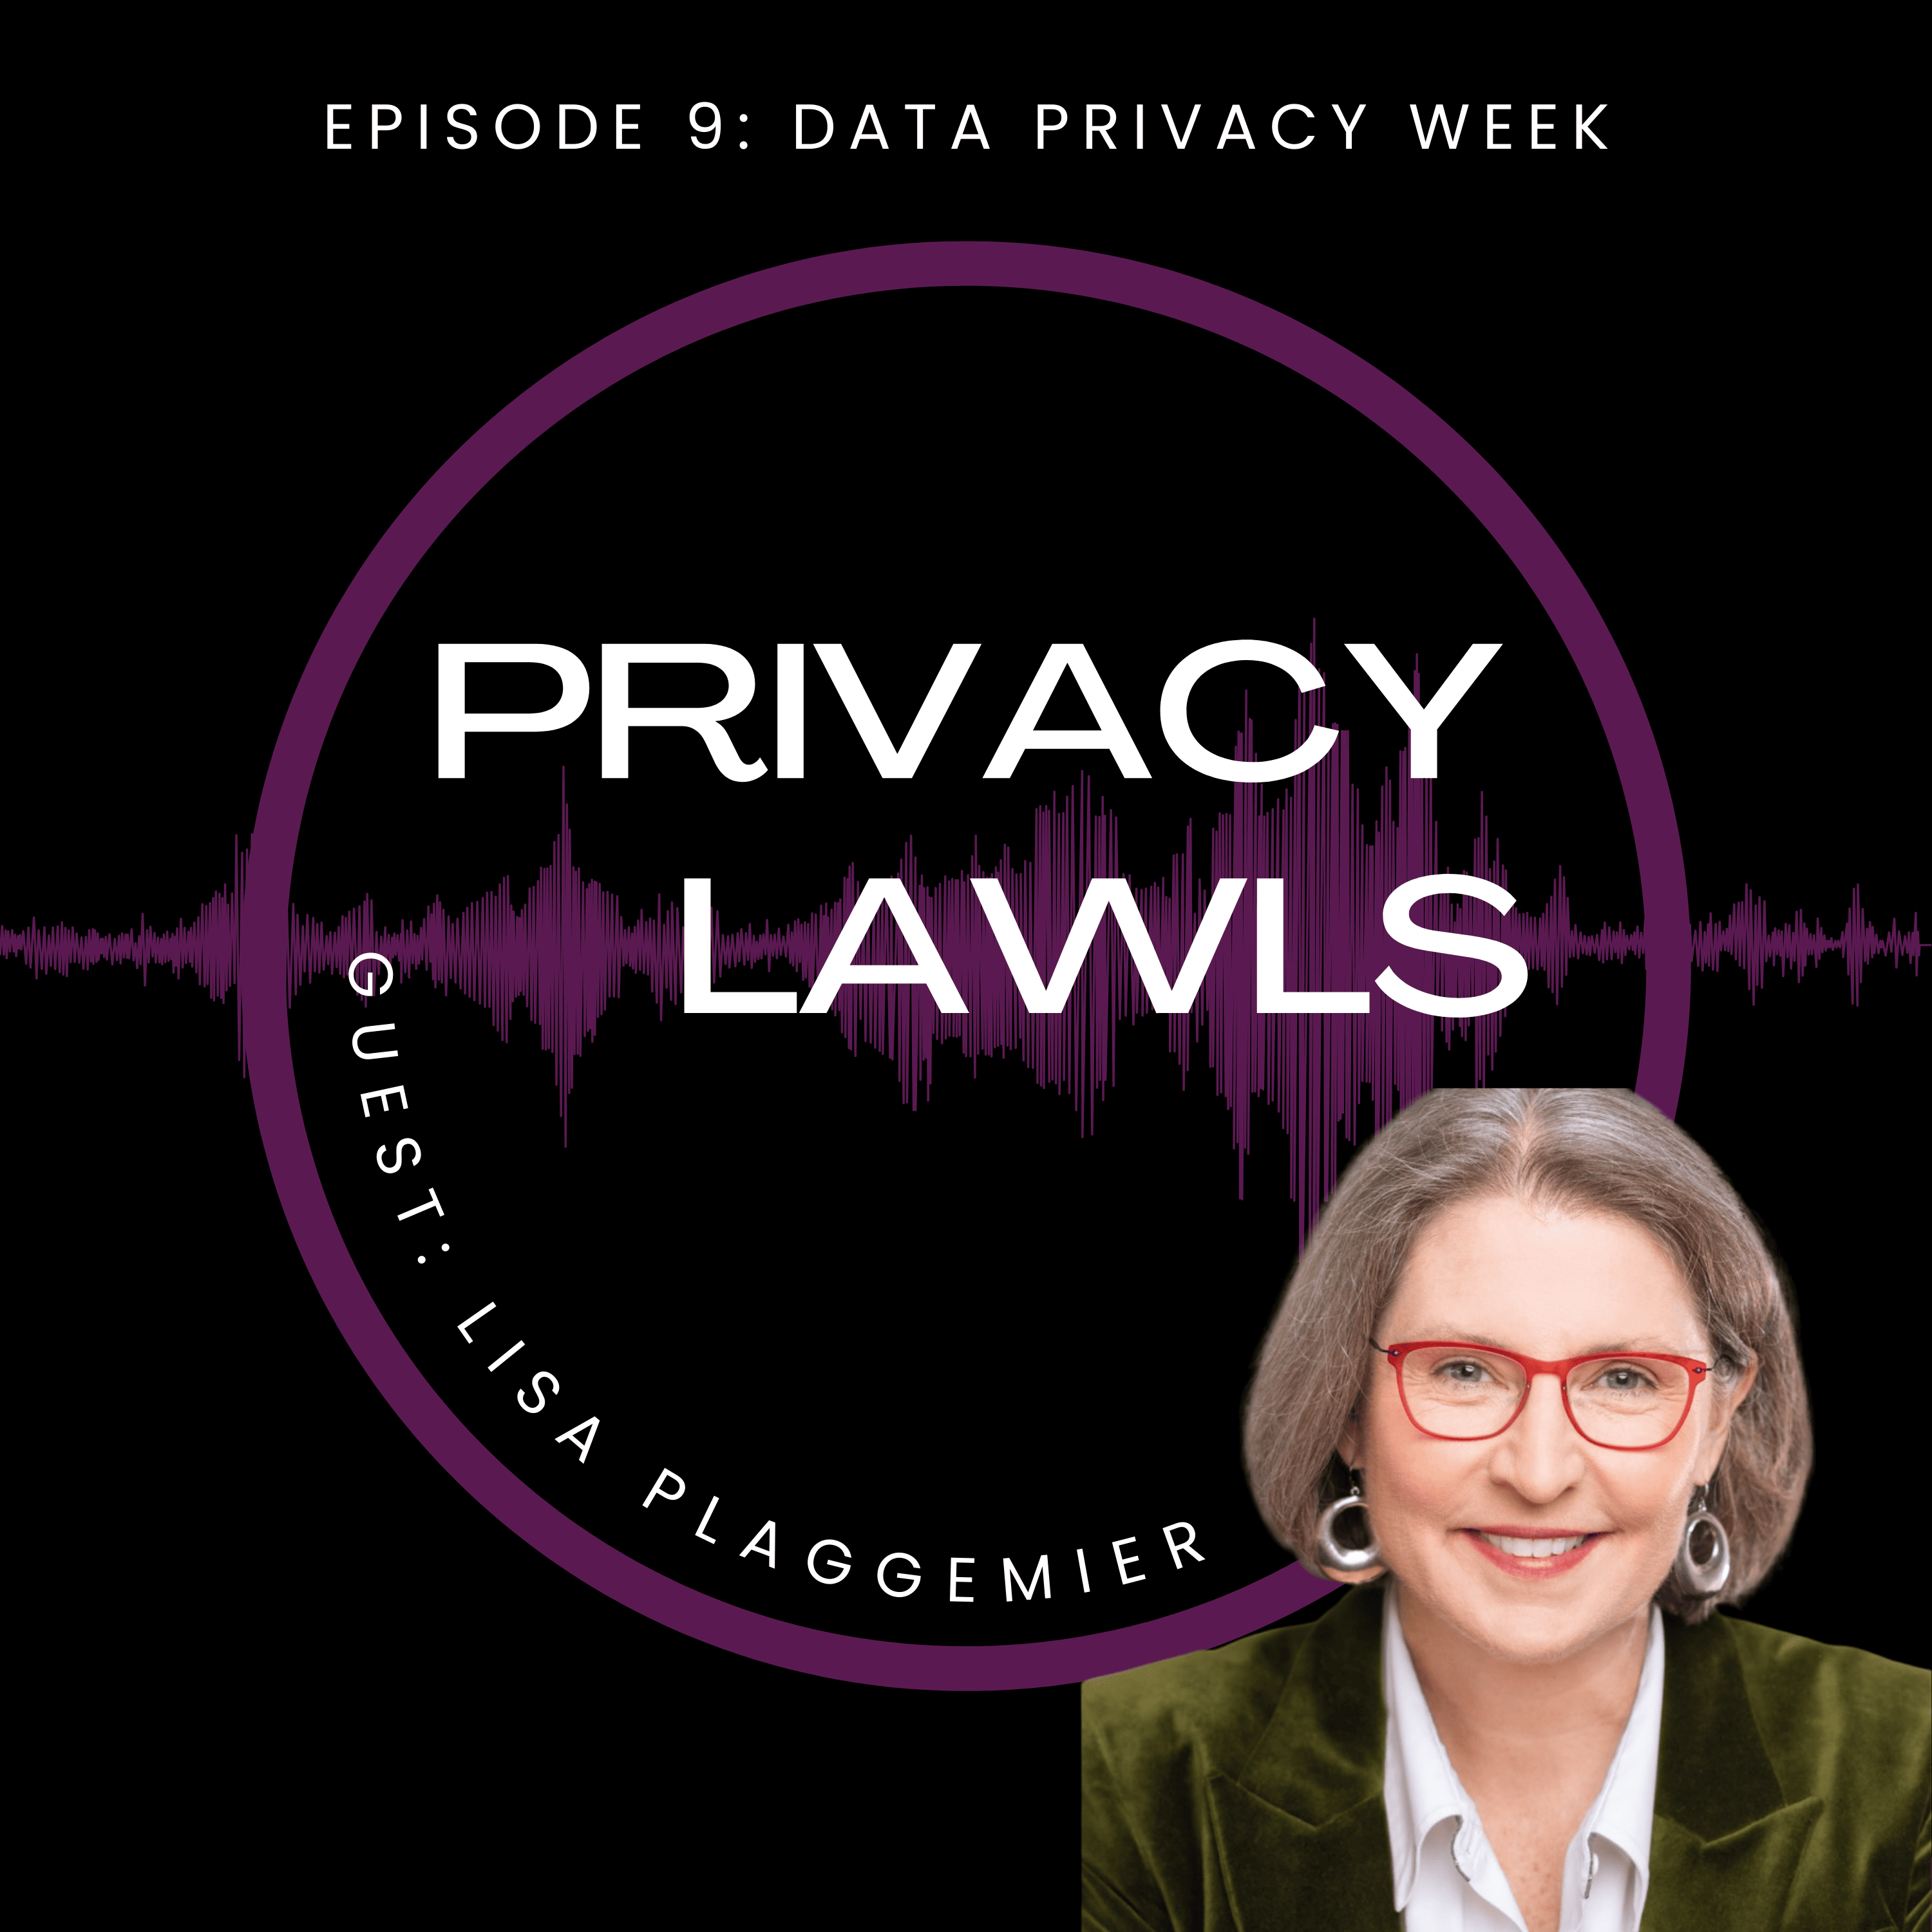 Episode 9 of Privacy Lawls